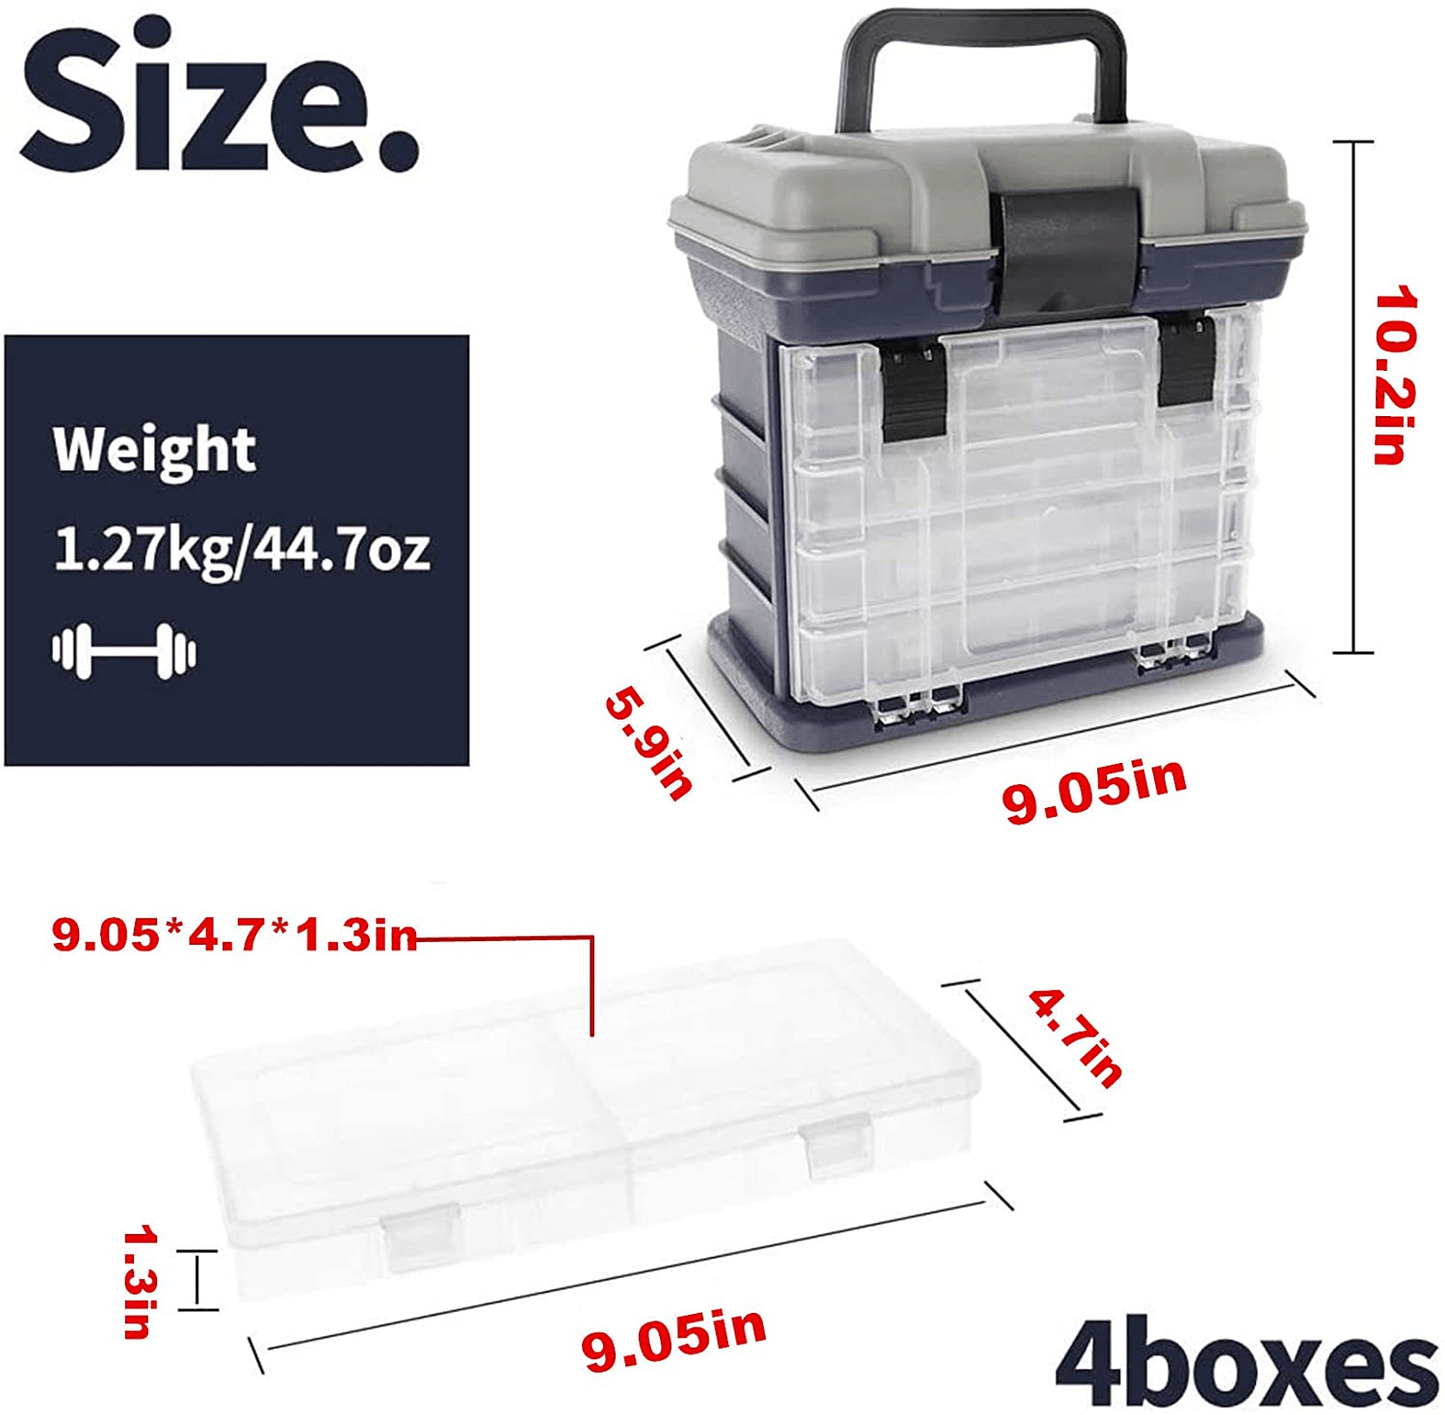 Croch Fishing Tackle Box with Portable 4 Layers Box，Bulk Storage under Lid Giving Room to Carry All Kinds of Fishing Accessories, Including Fishing Lures, Sinkers, Floats, Line and so On.